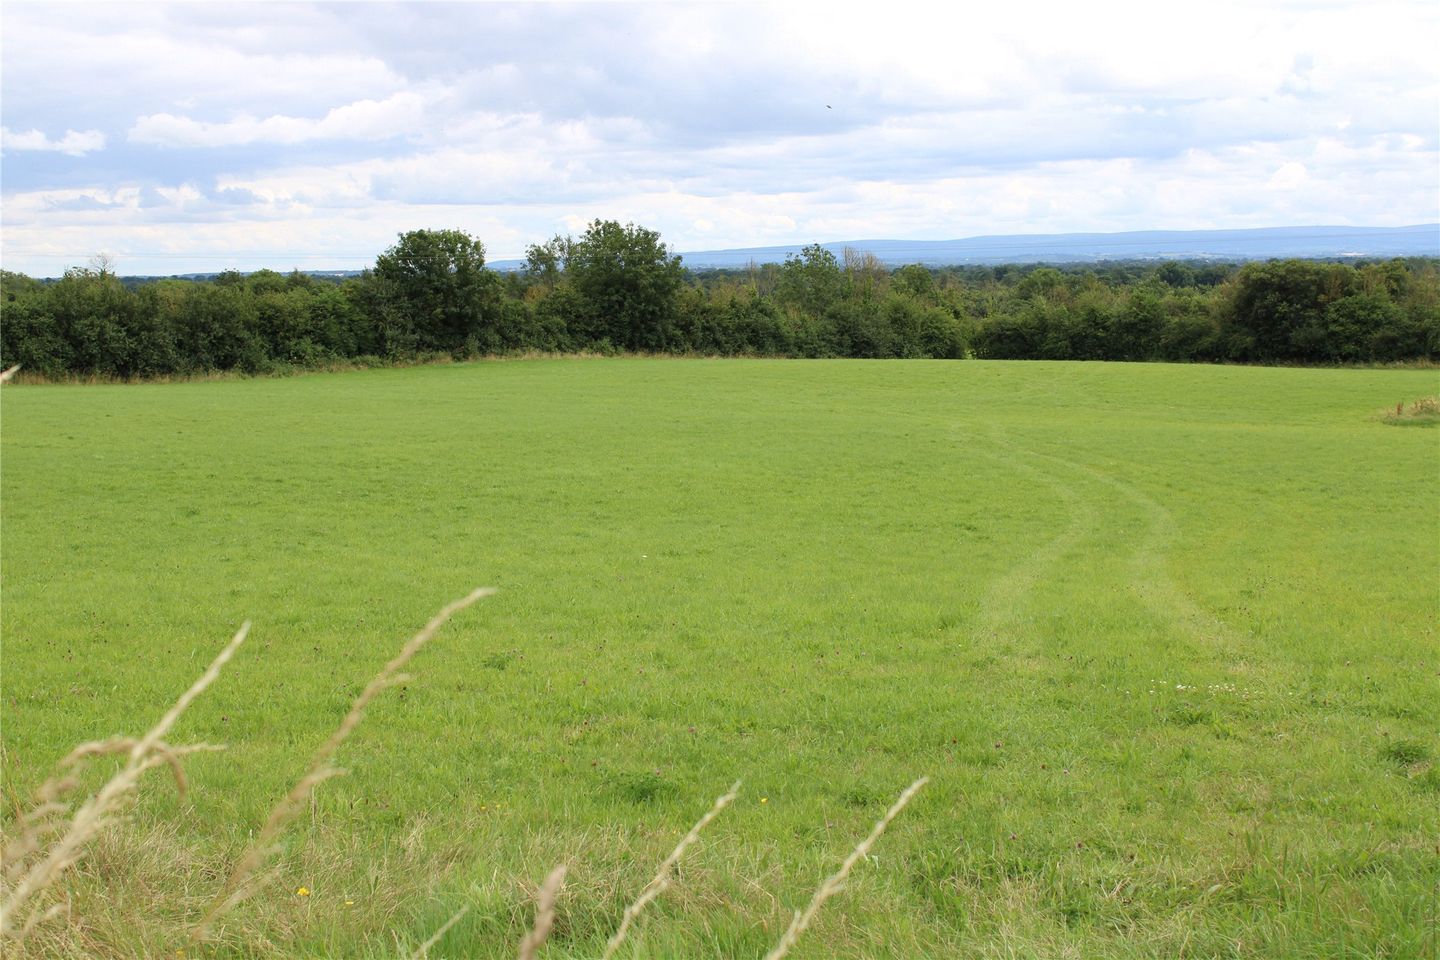 Site At Boher, Ballycumber, Co Offaly